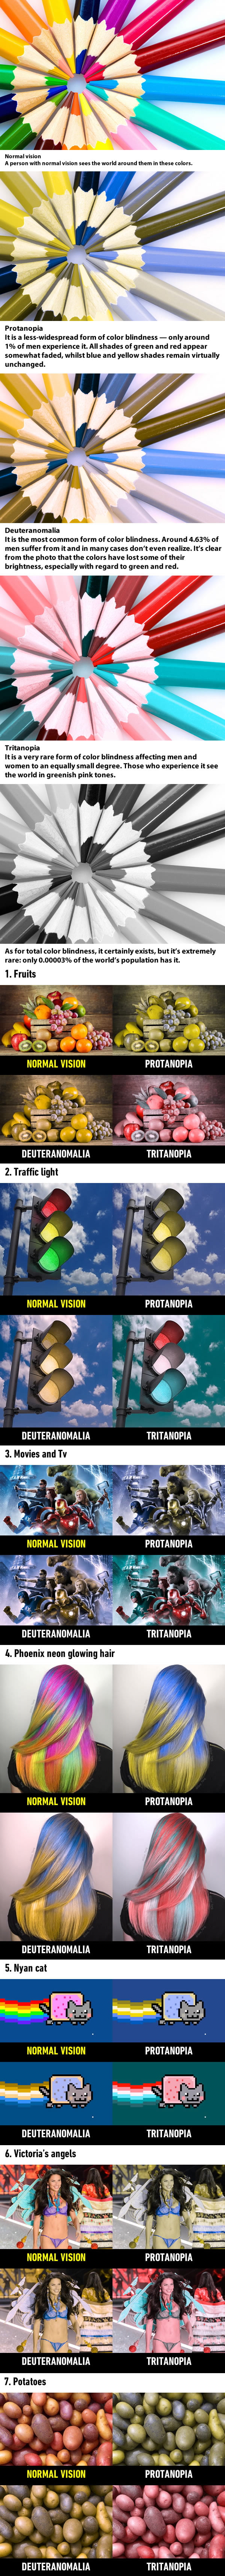 How People With Different Types of Colour Blindness See the World